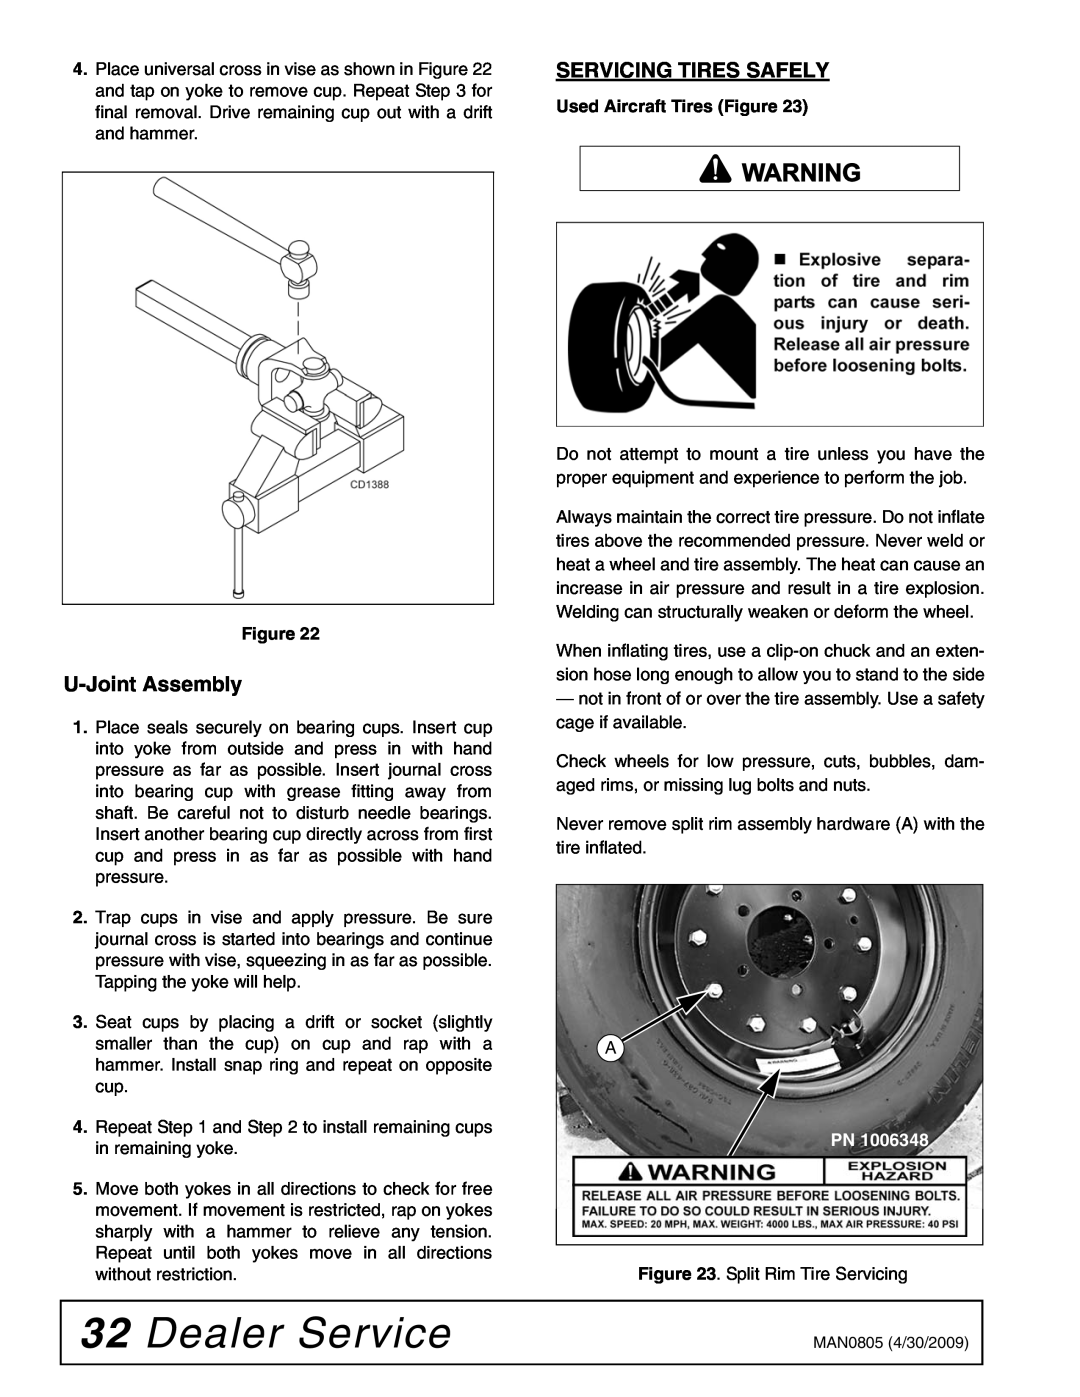 Woods Equipment BW180HDQ, BW180HB manual Dealer Service, U-JointAssembly, Servicing Tires Safely 